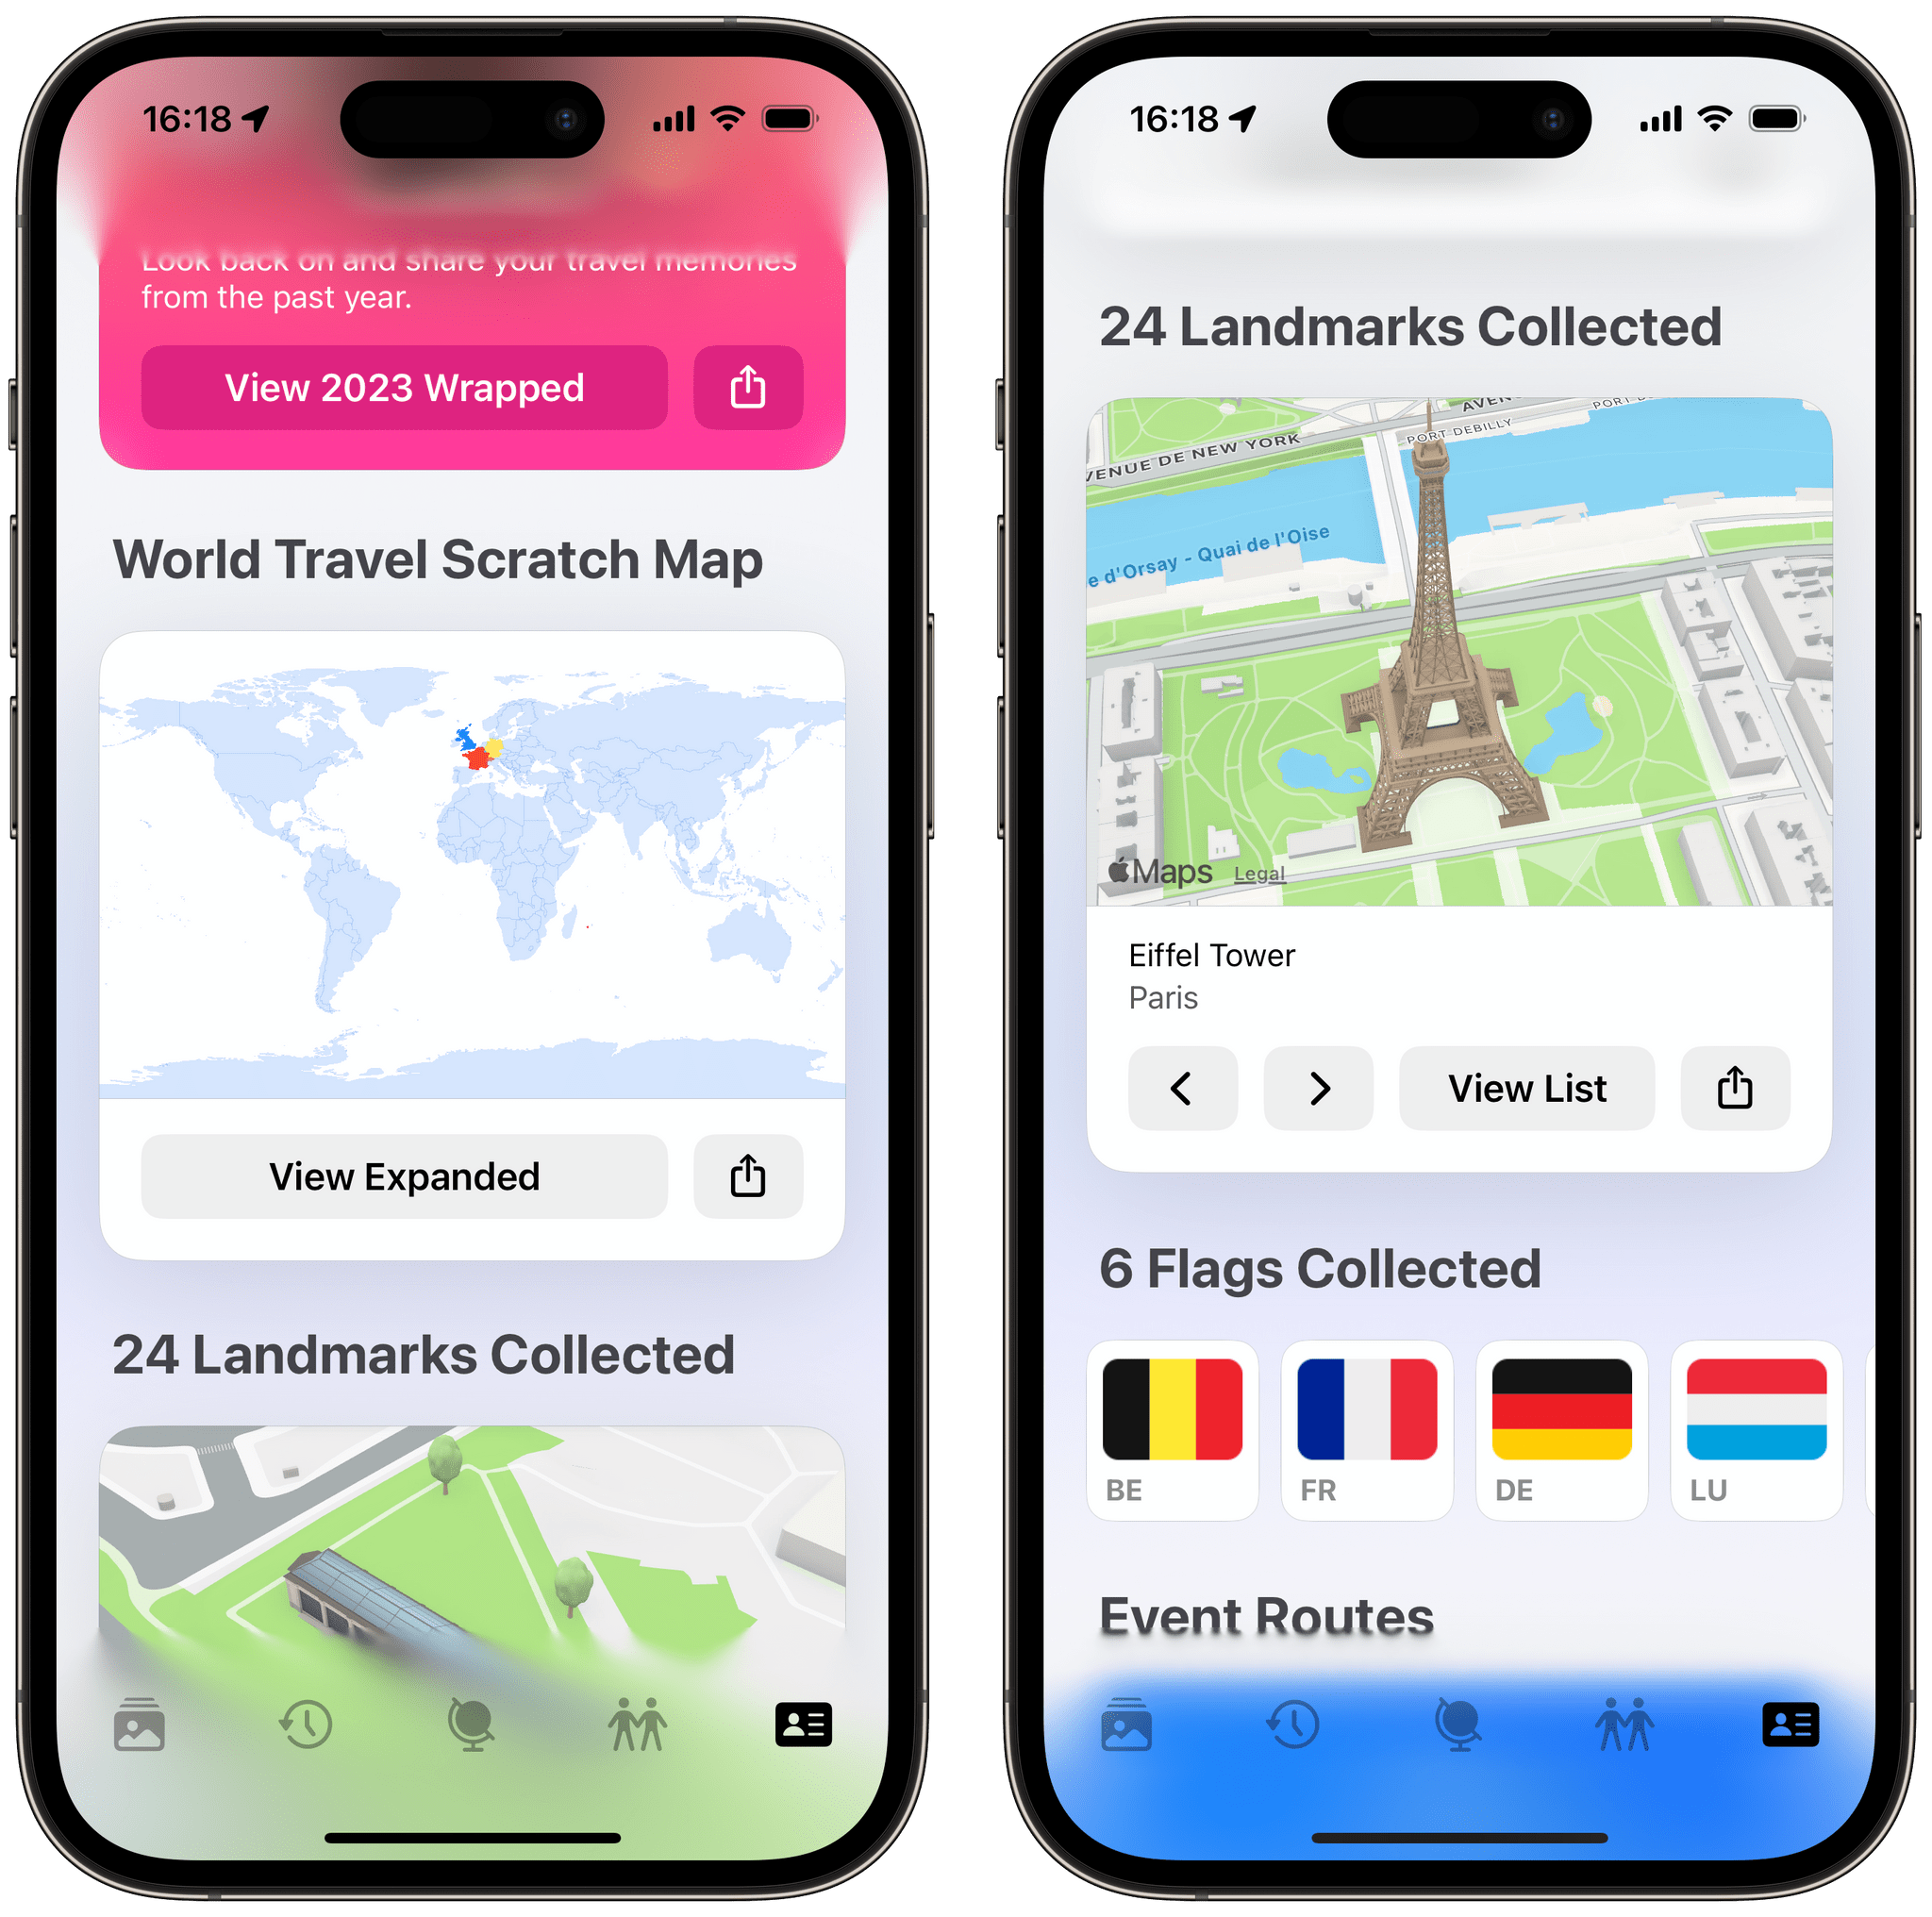 Globetrotter is like a traveler's pinboard where you can collect landmarks and flags of the countries you have visited.